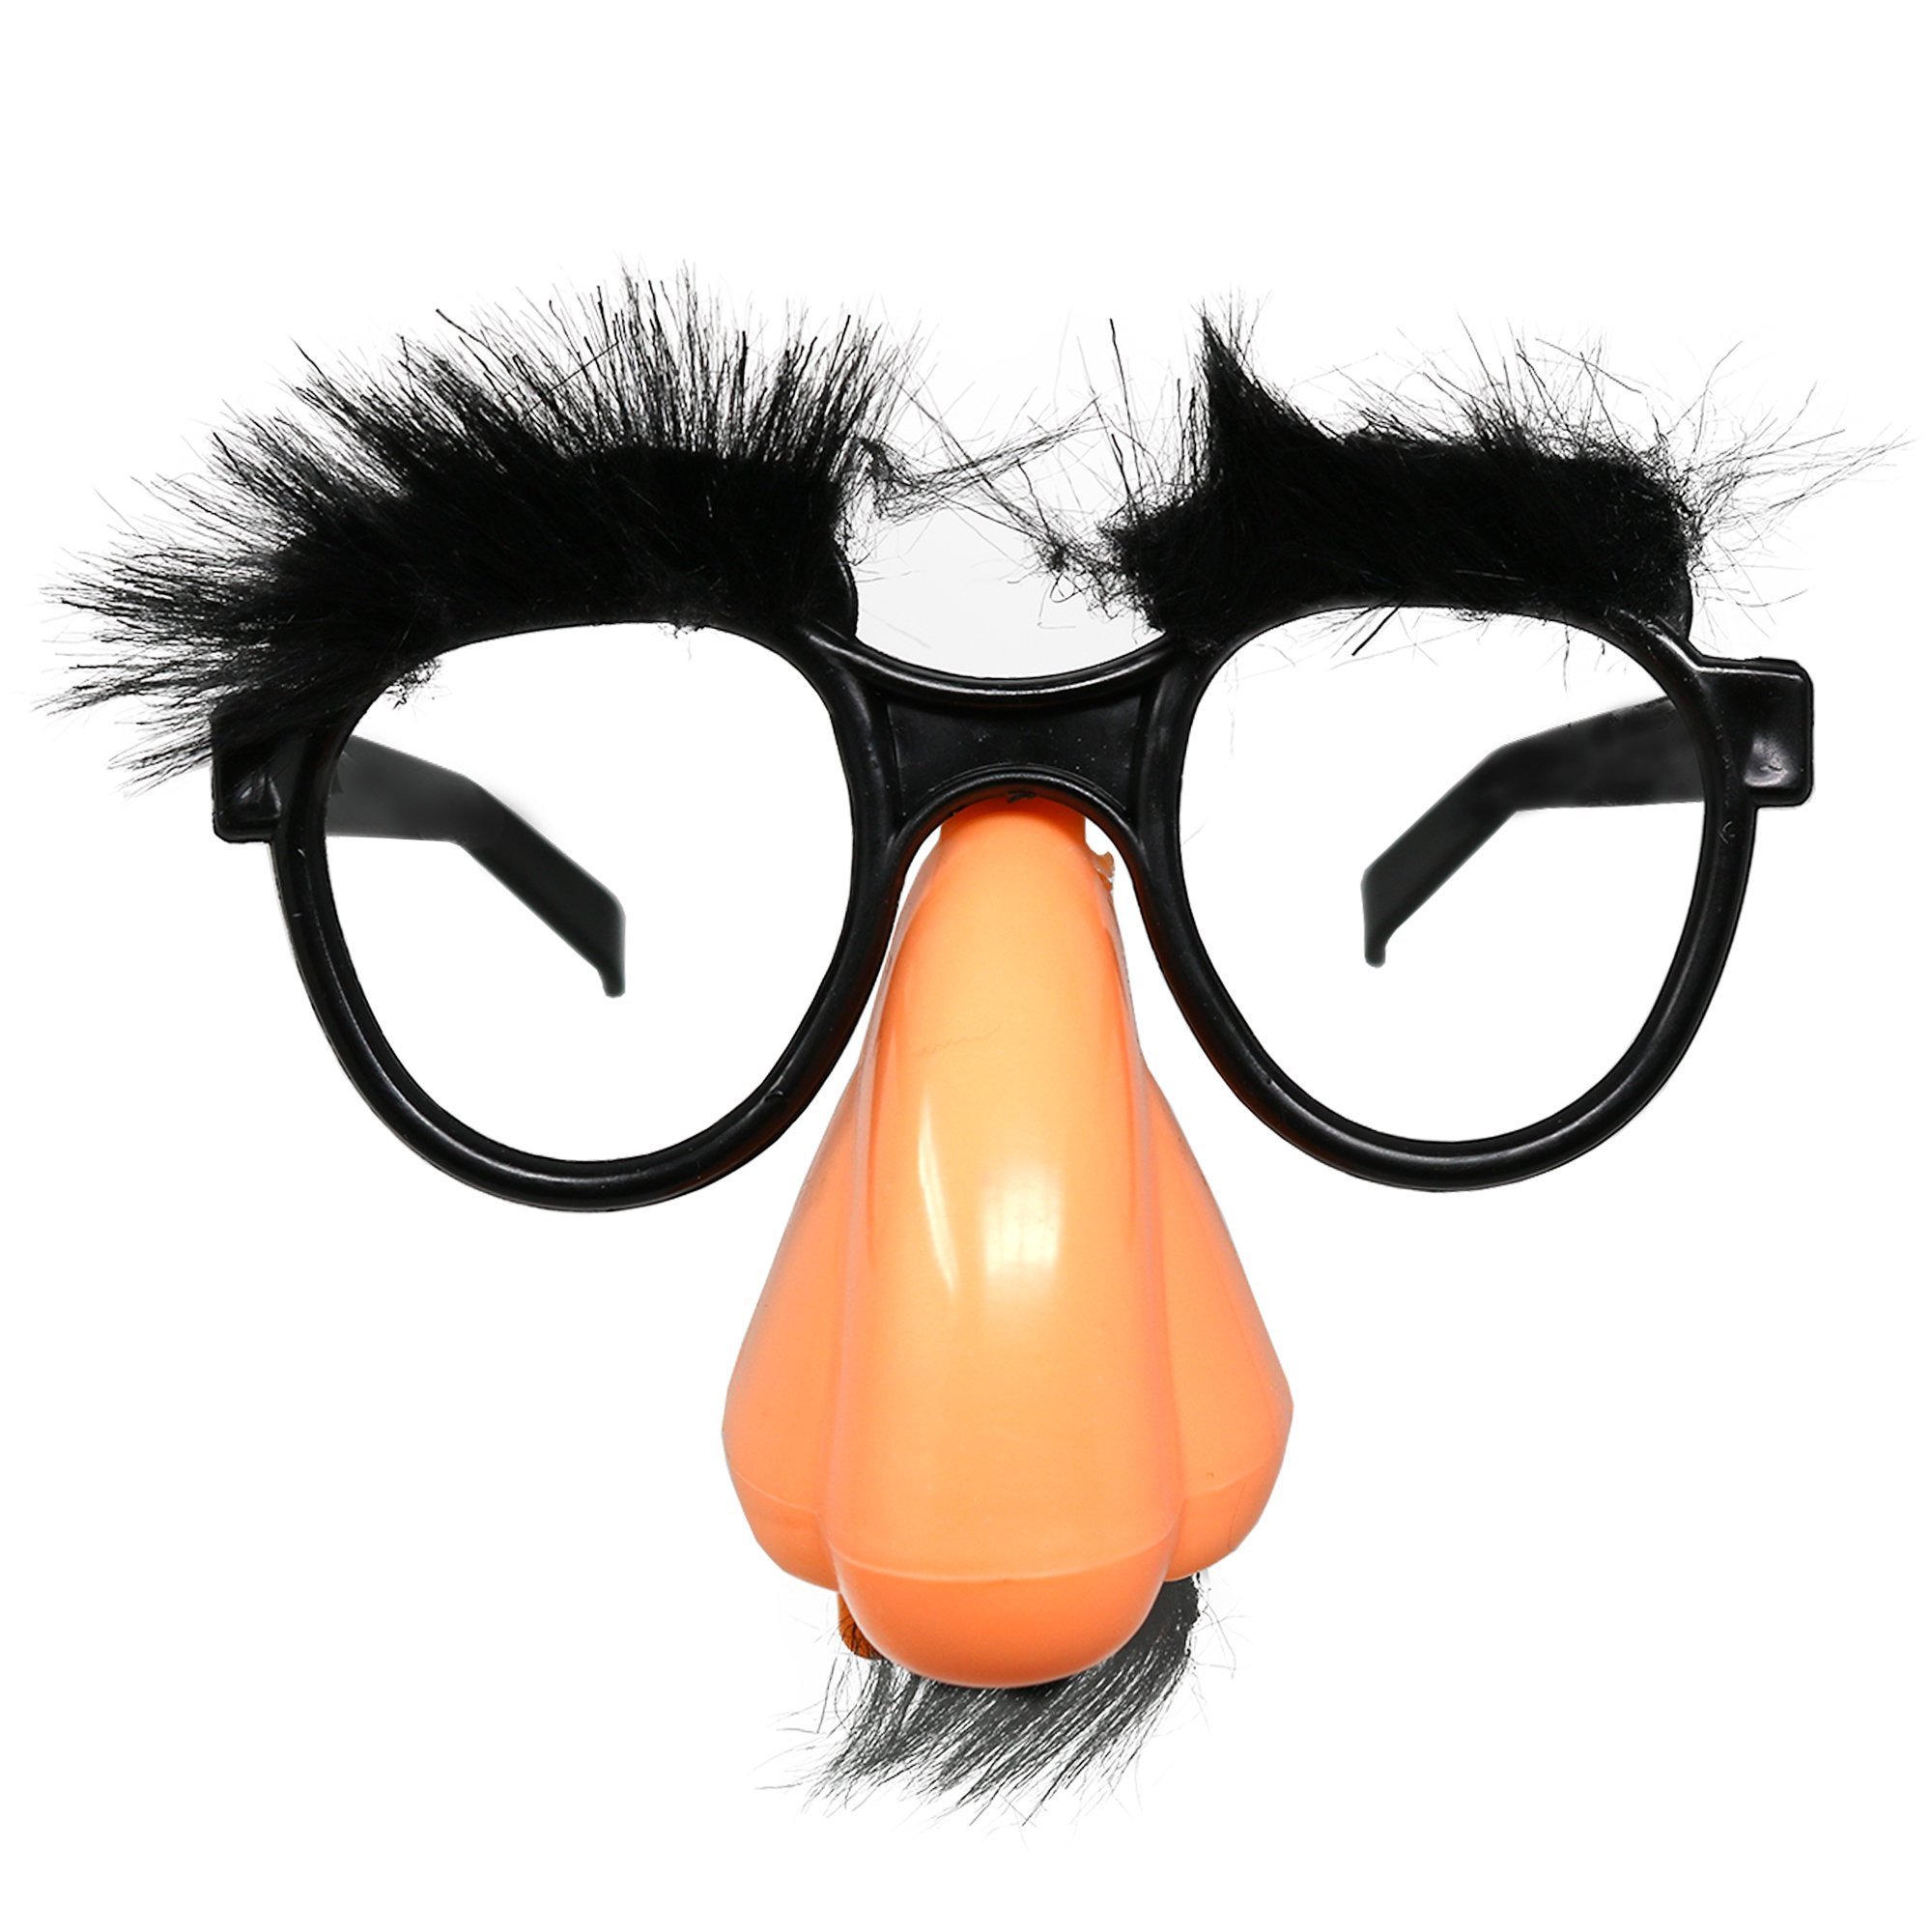 Disguise Glasses with Nose - Groucho Marx Funny Glasses - 1 Piece - image 1 of 5